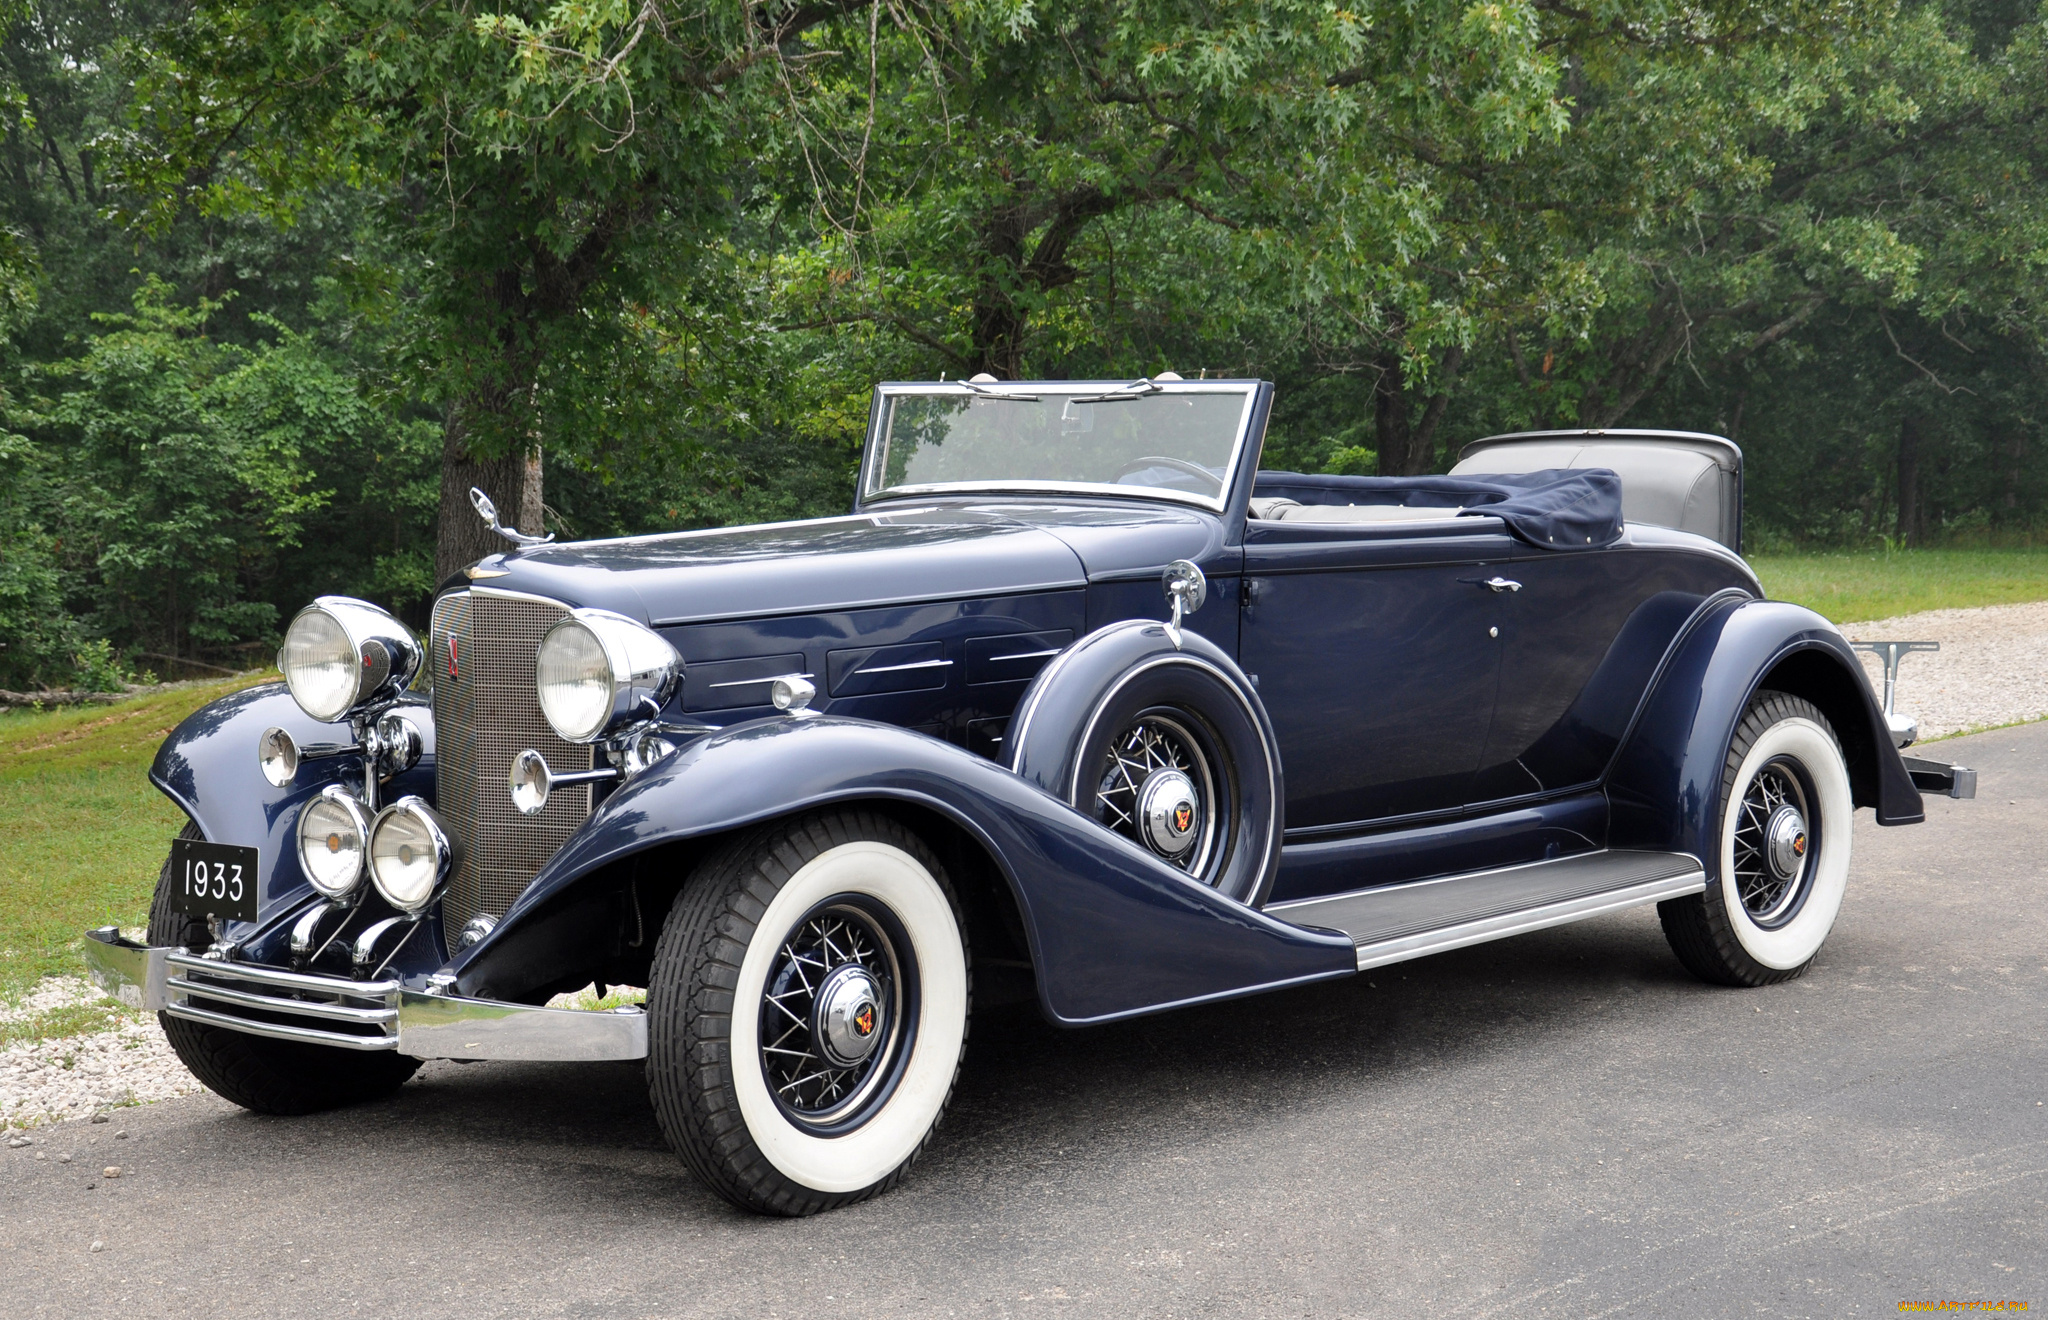 cadillac, v12, 370, c, convertible, coupe, 1933, автомобили, классика, c, 1933, coupe, convertible, 370, v12, cadillac